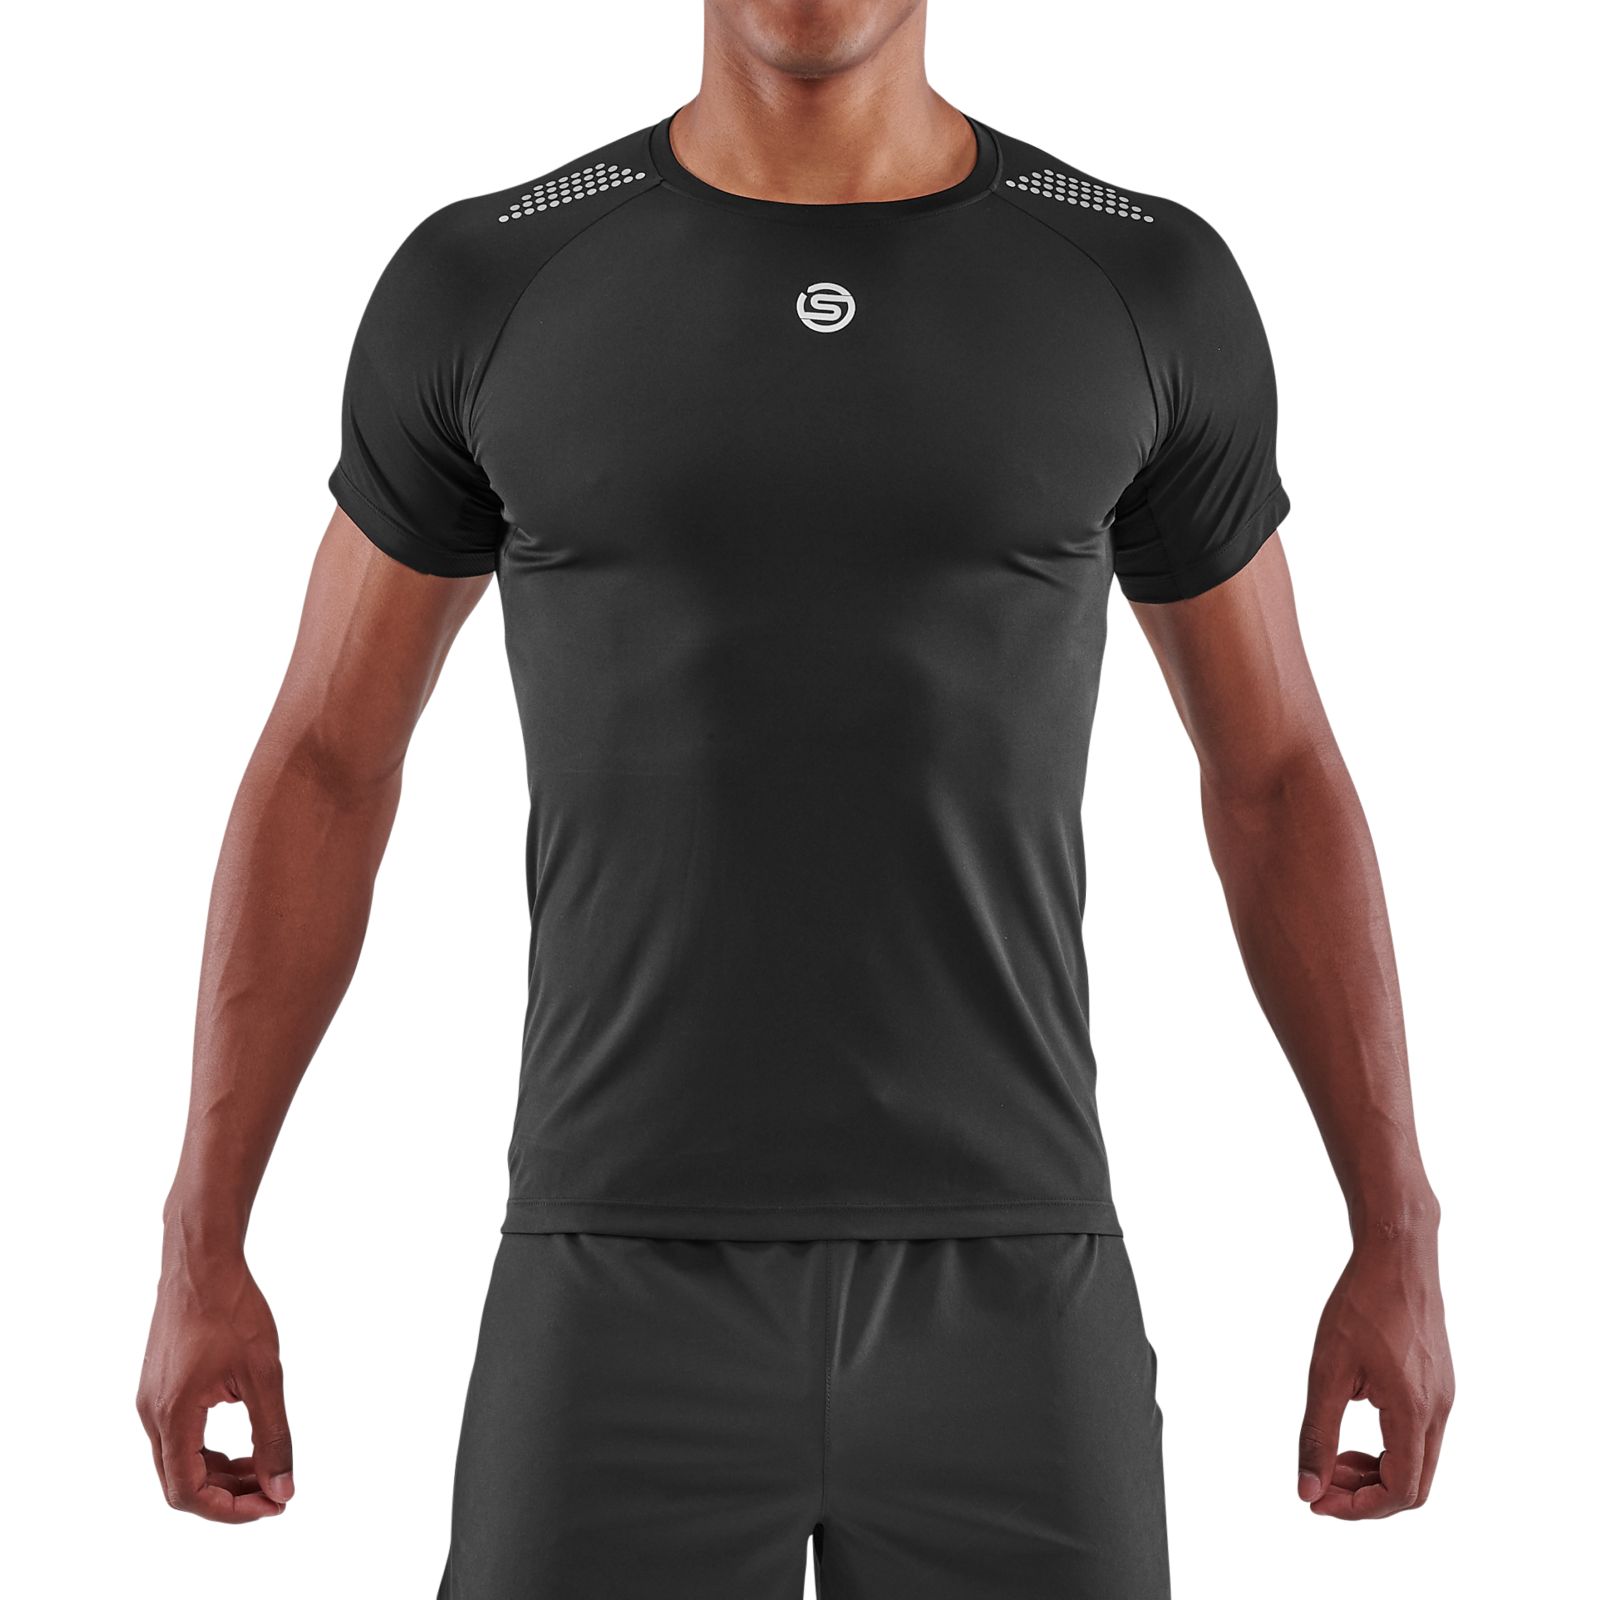 SALE  SKINS A400 MEN'S COMPRESSION SHORT SLEEVE TOP (BLACK/YELLOW